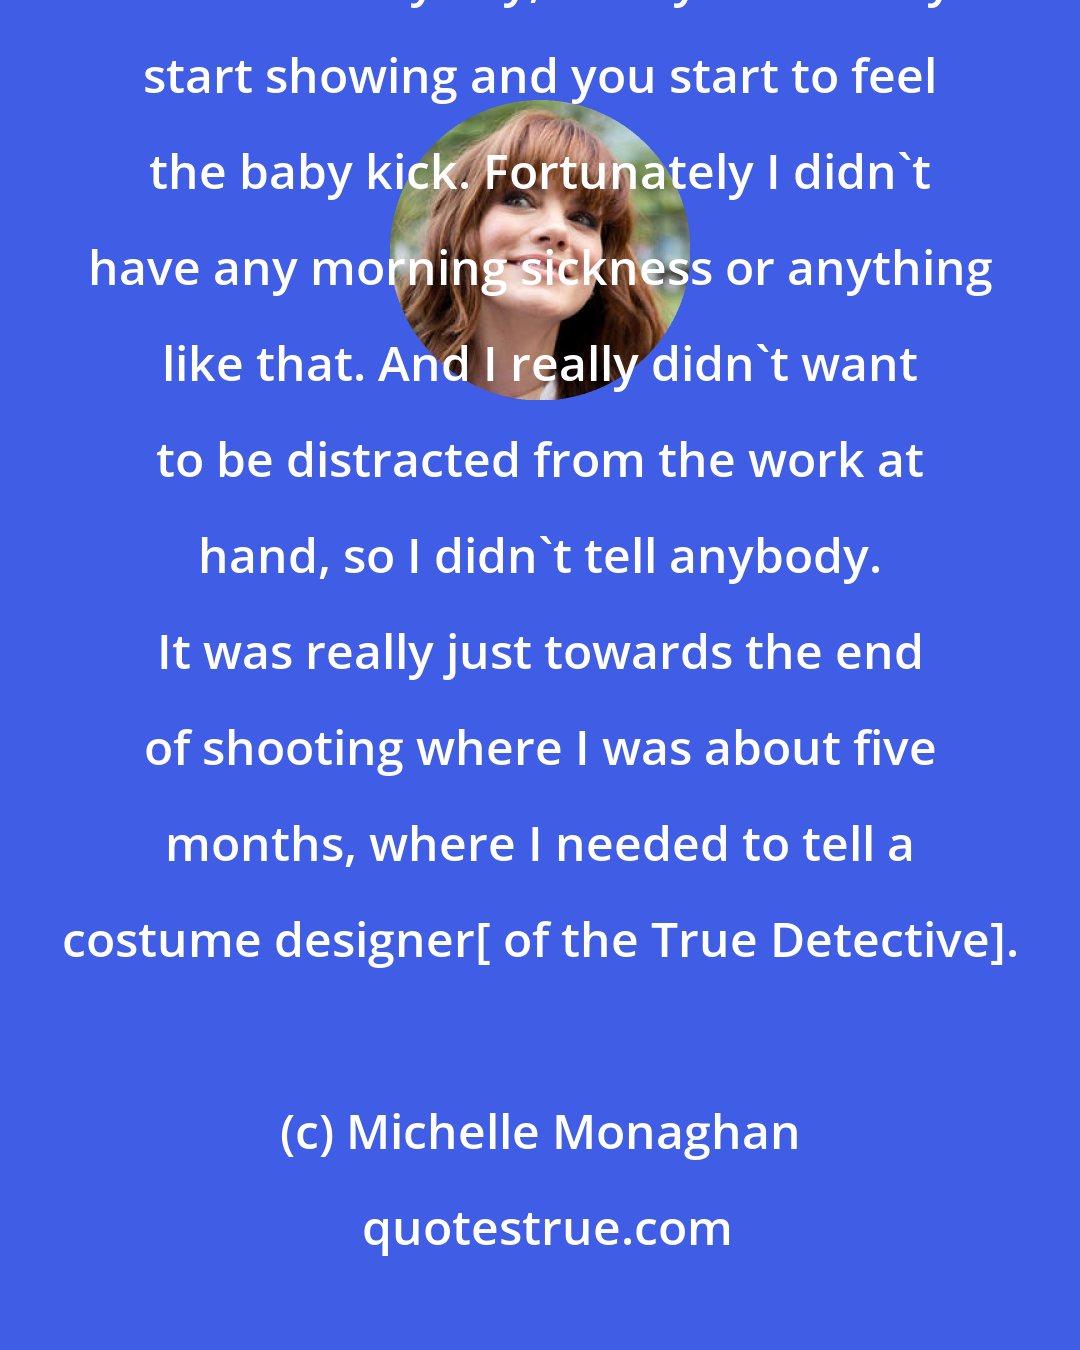 Michelle Monaghan: I was at the beginning stages of my pregnancy, and it never really feels real anyway, until you actually start showing and you start to feel the baby kick. Fortunately I didn't have any morning sickness or anything like that. And I really didn't want to be distracted from the work at hand, so I didn't tell anybody. It was really just towards the end of shooting where I was about five months, where I needed to tell a costume designer[ of the True Detective].